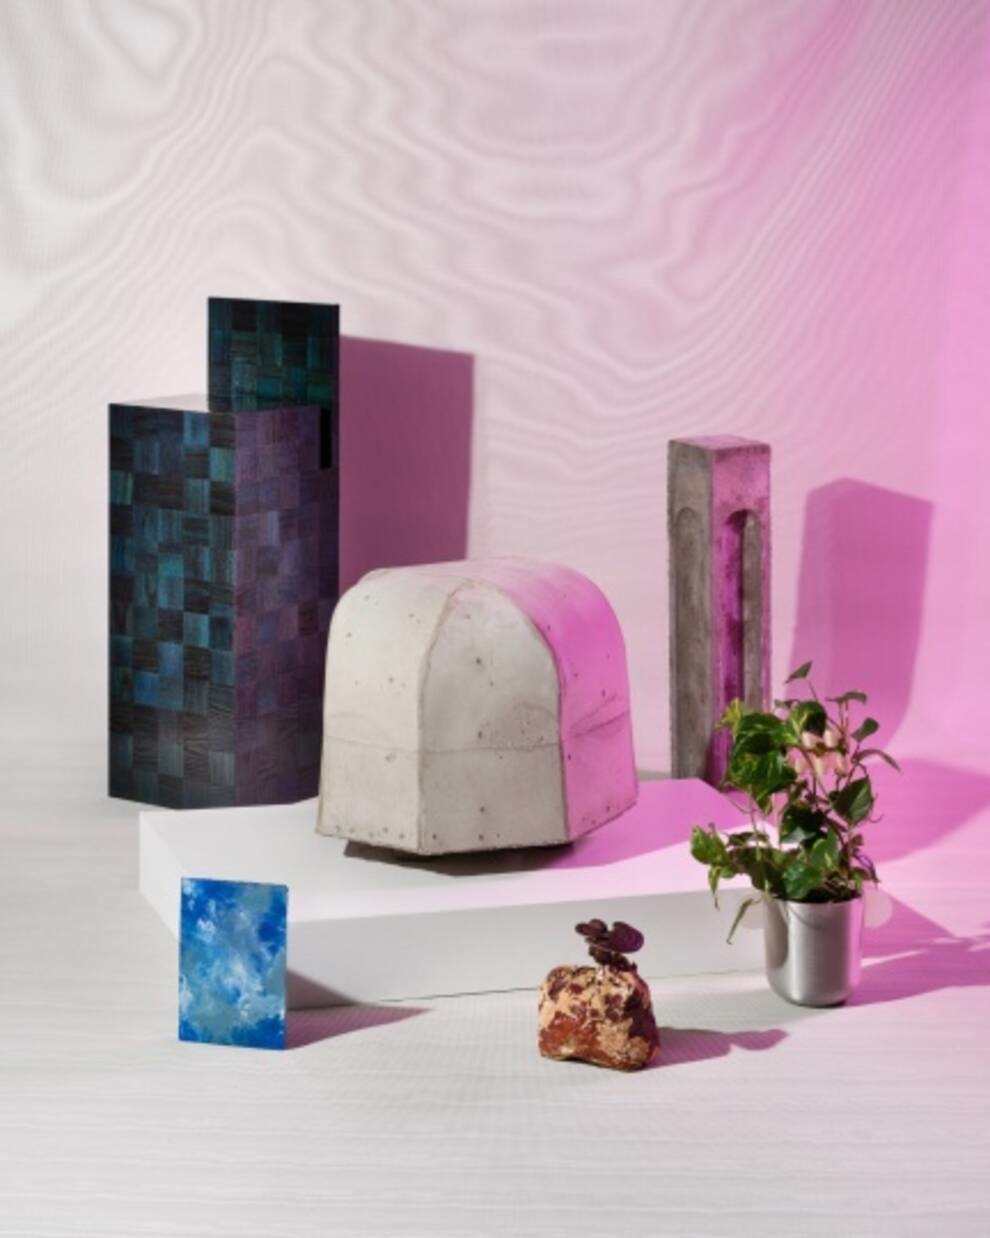 Swedish designers have developed recyclable household goods